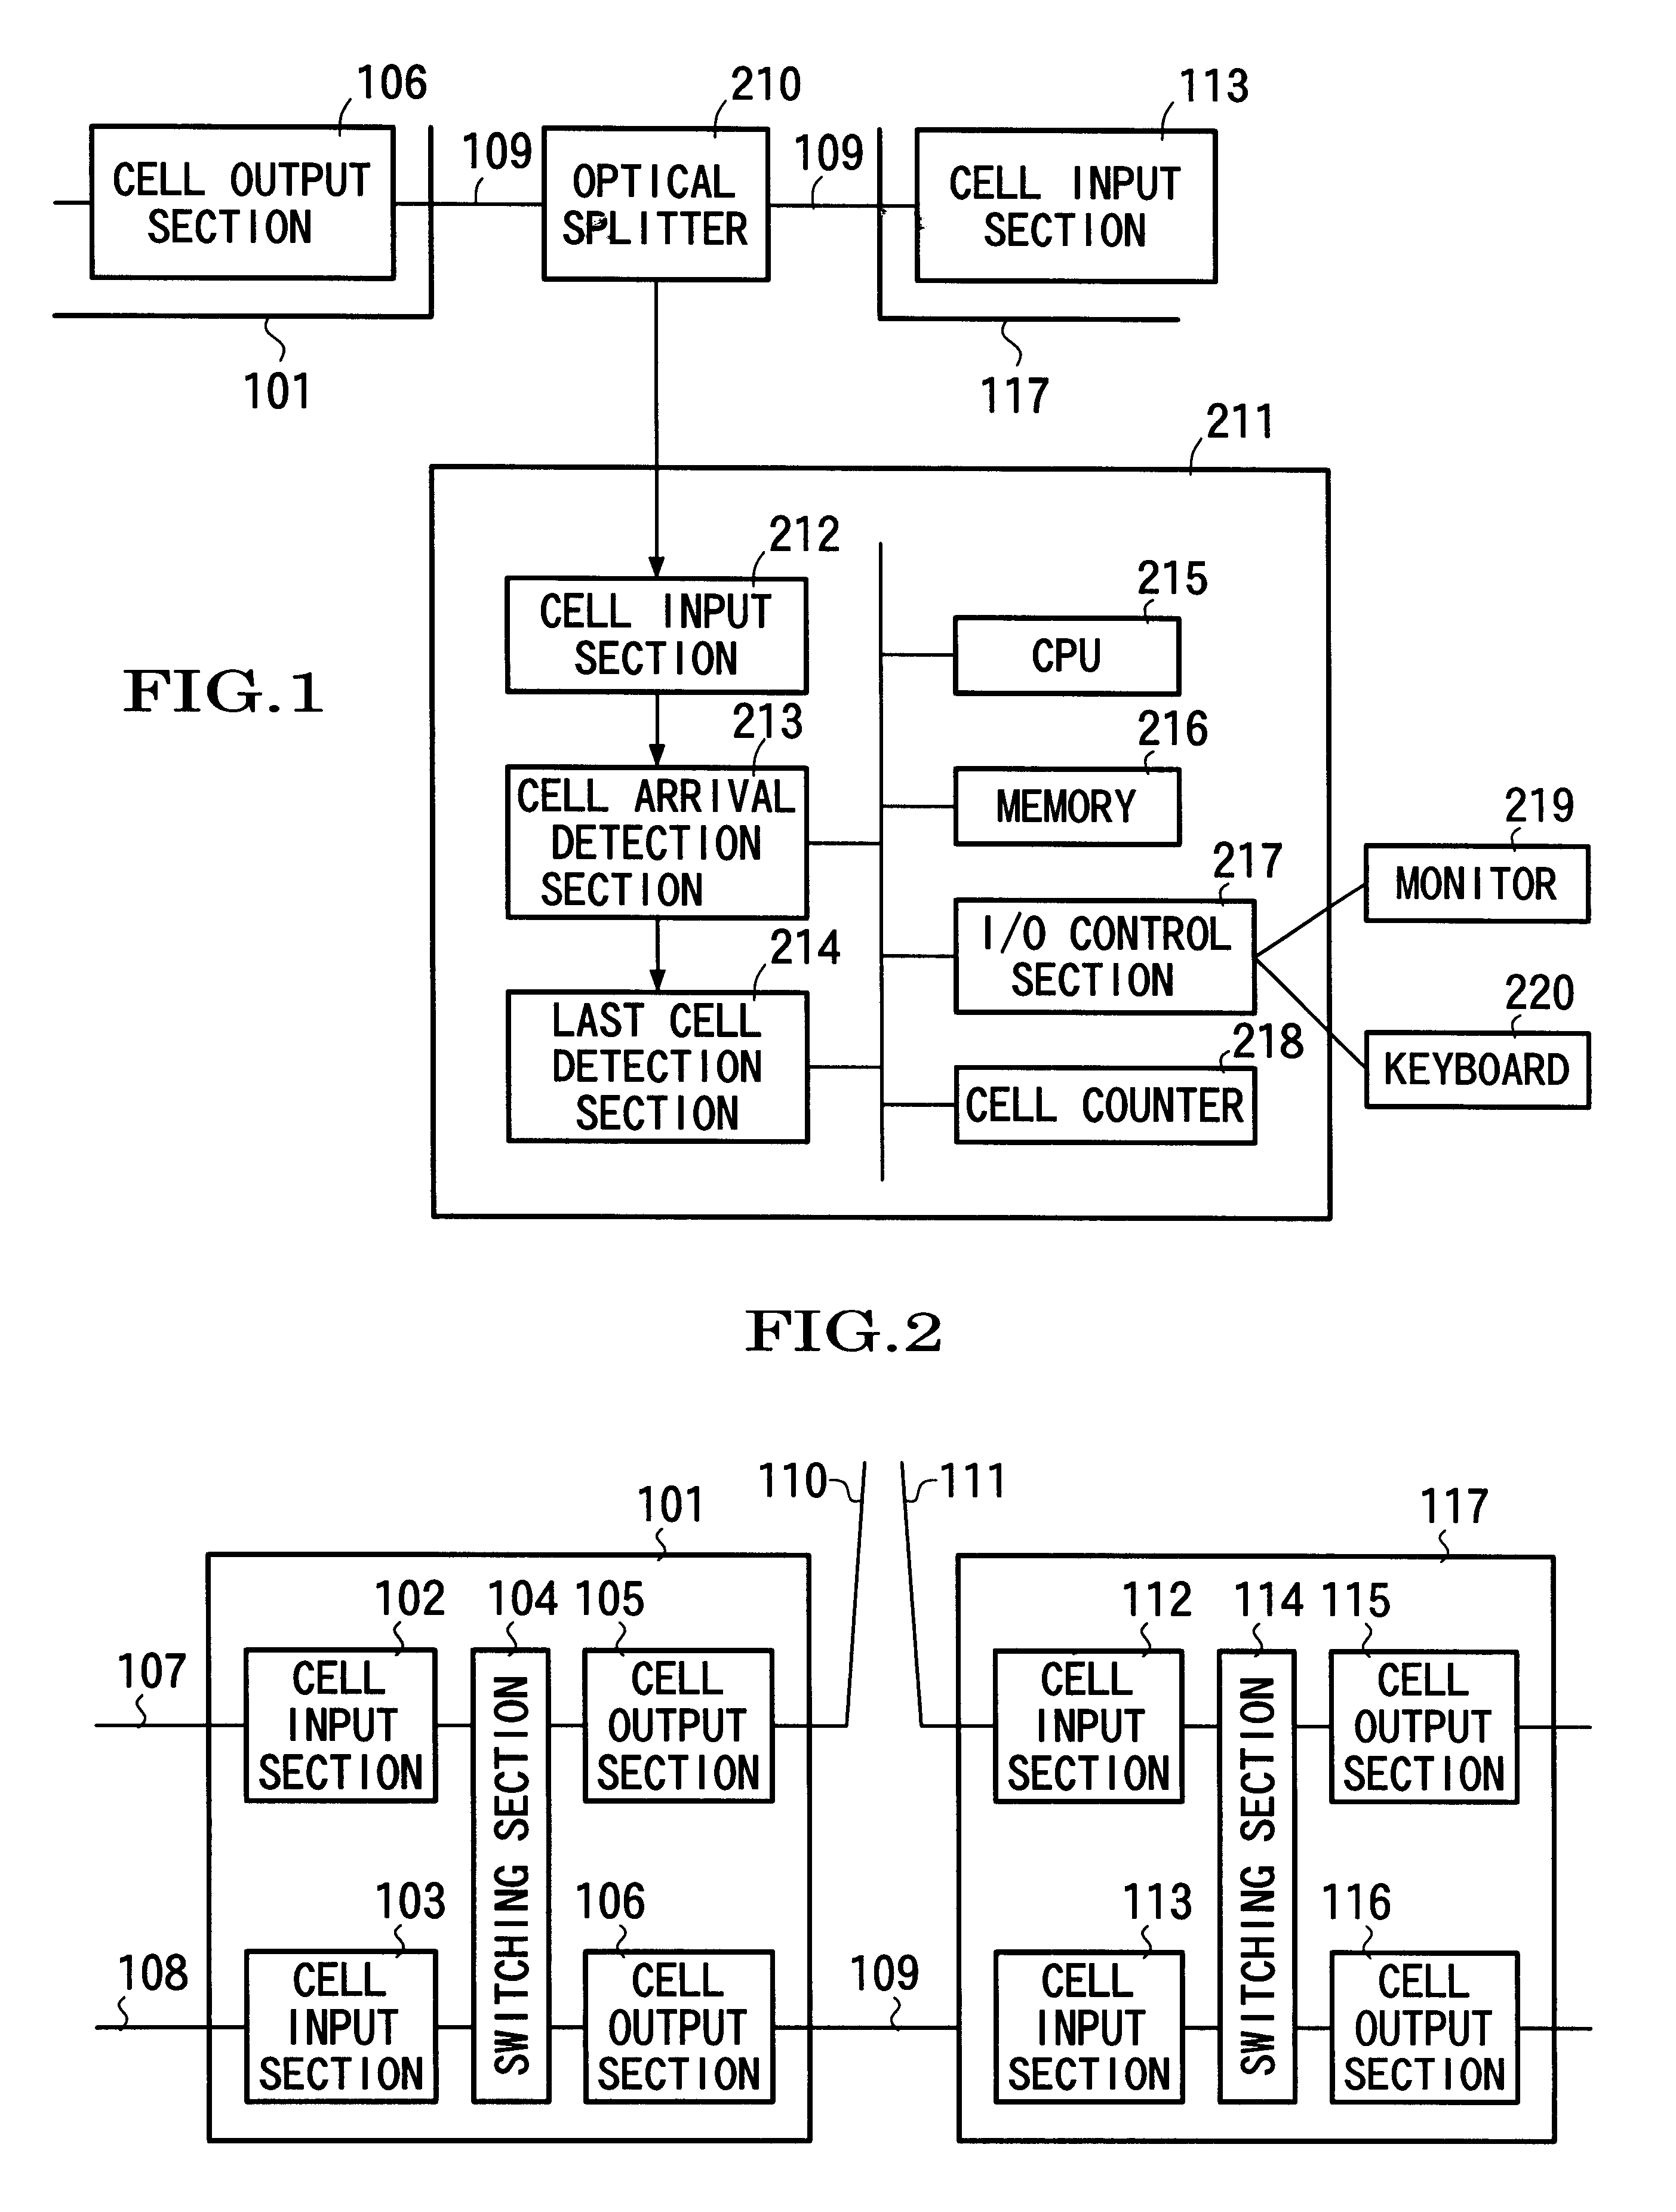 Apparatus for quality of service evaluation and traffic measurement